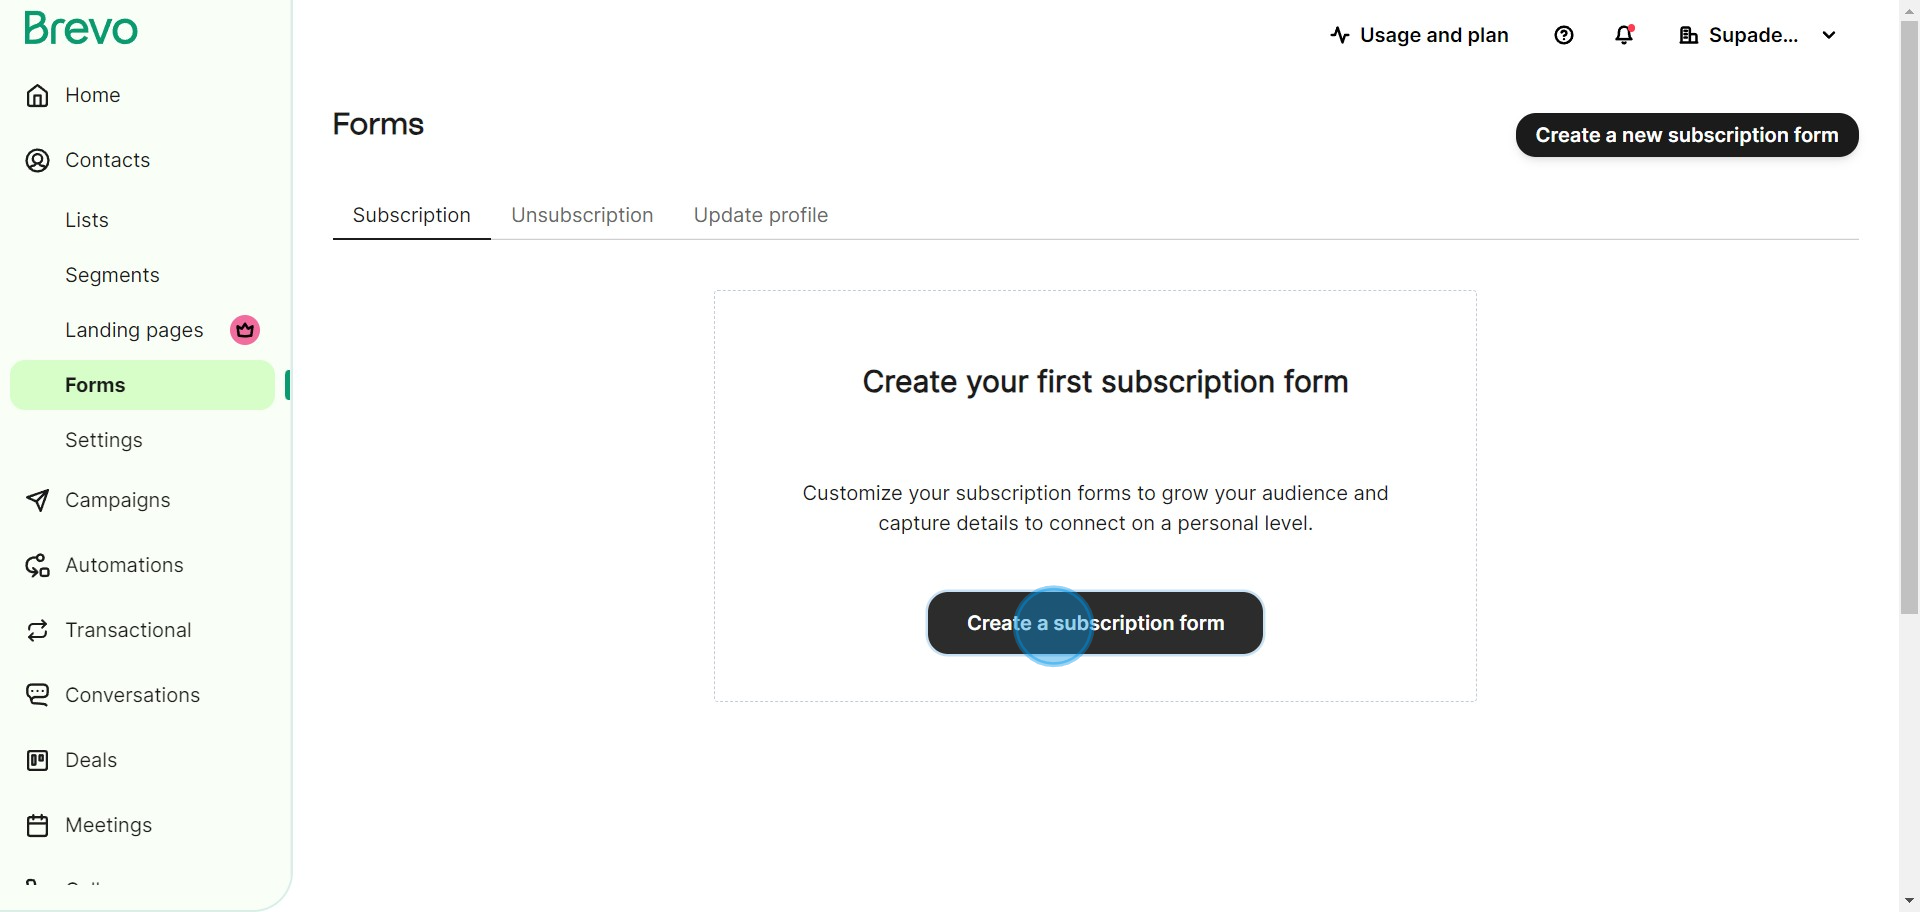 3 Click on "Create a subscription form"